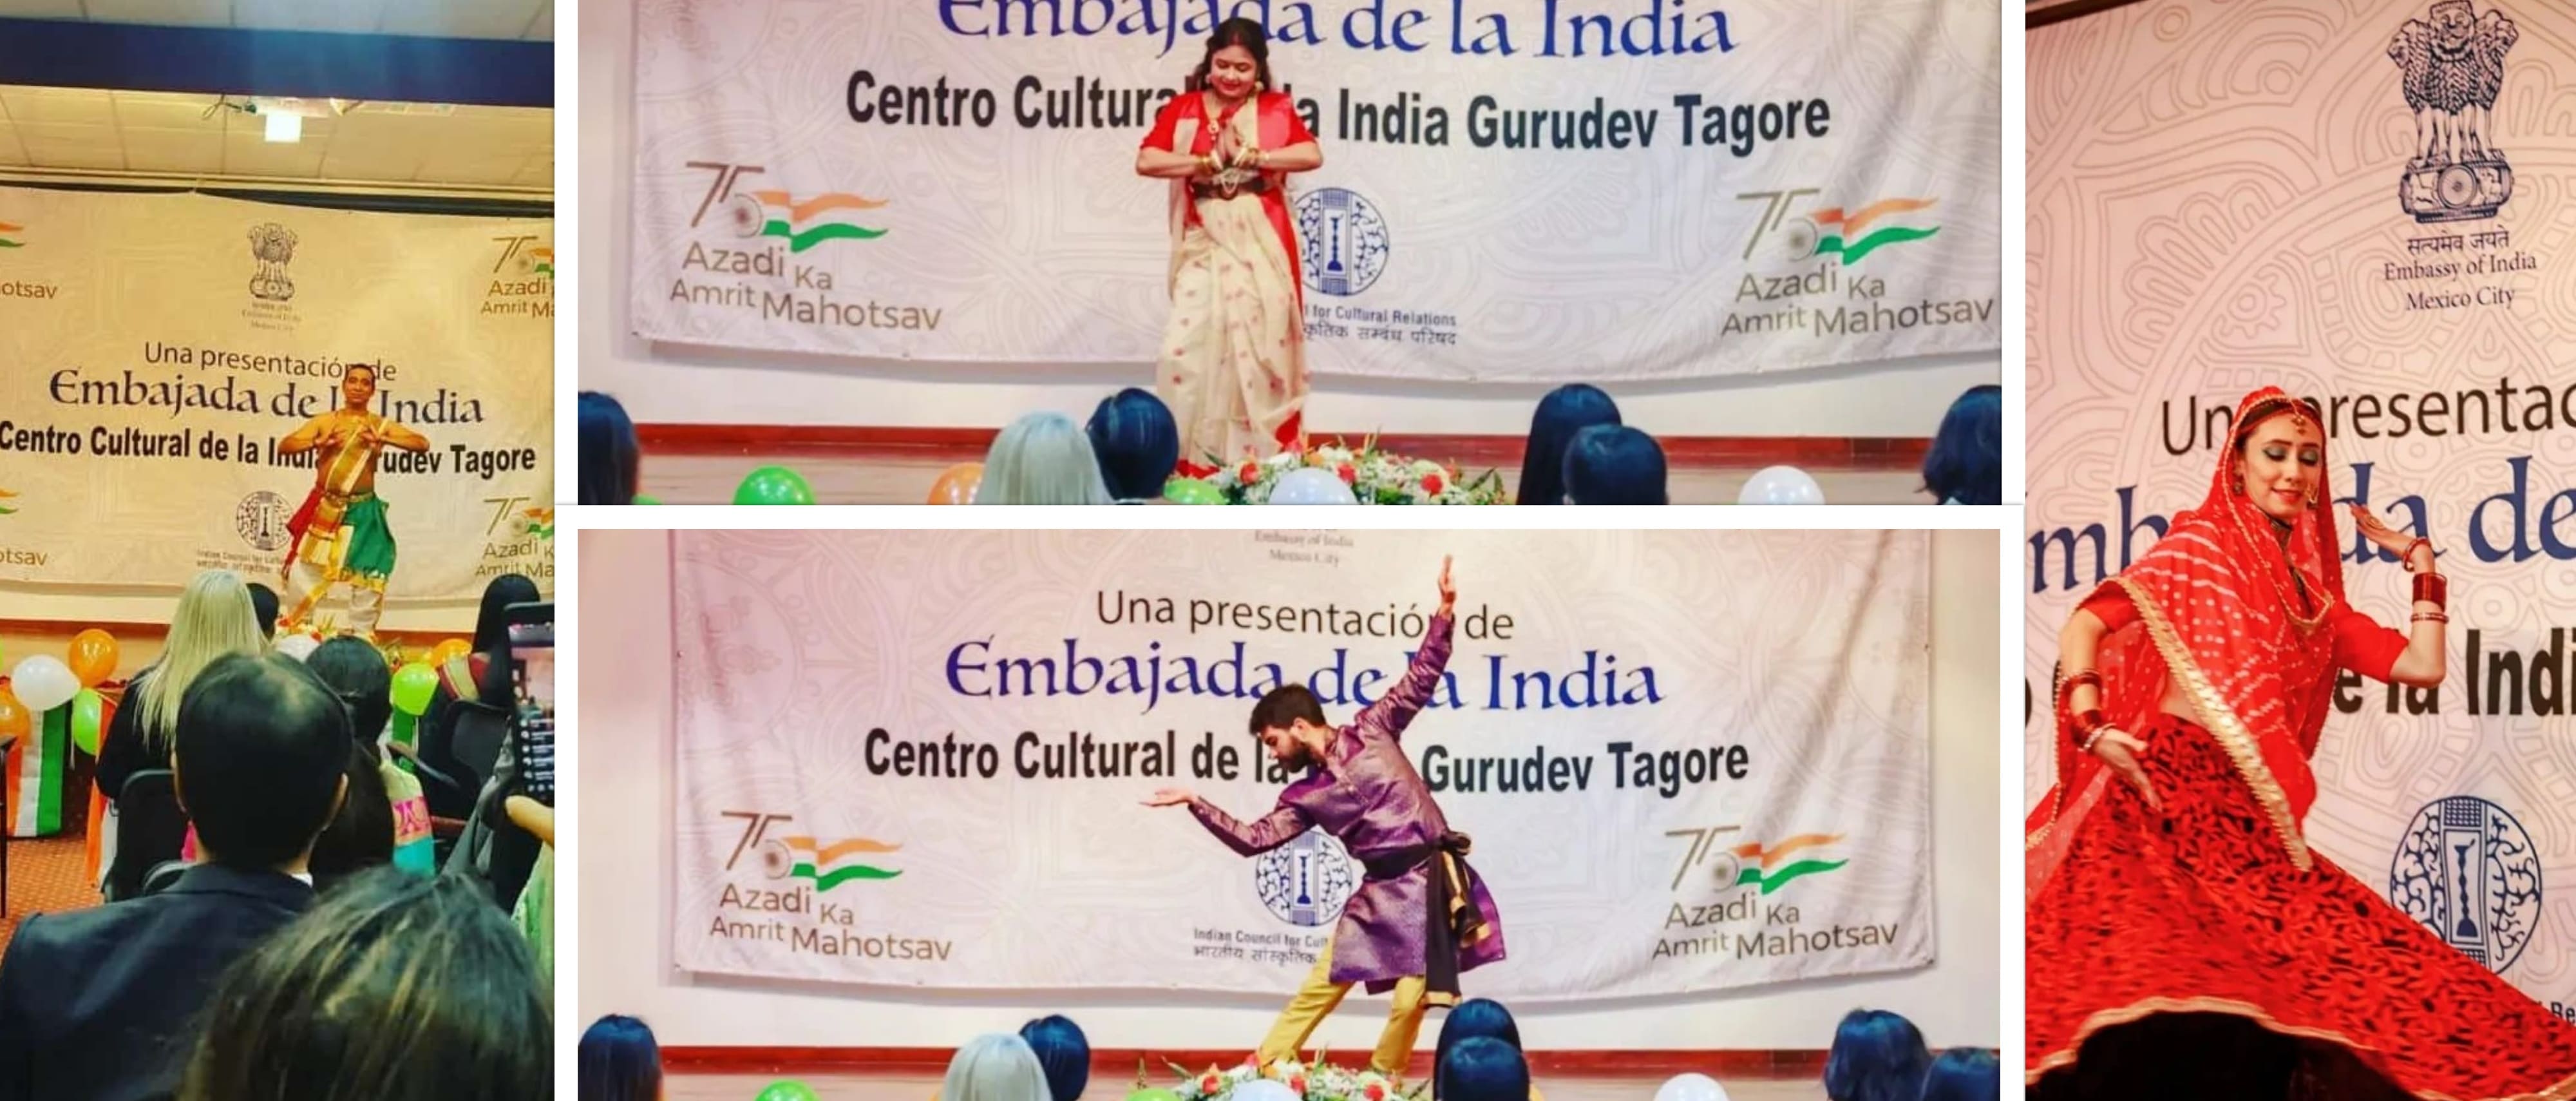  Cultural activities held as part of 73rd Republic Day celebrations at Embassy of India in Mexico City'